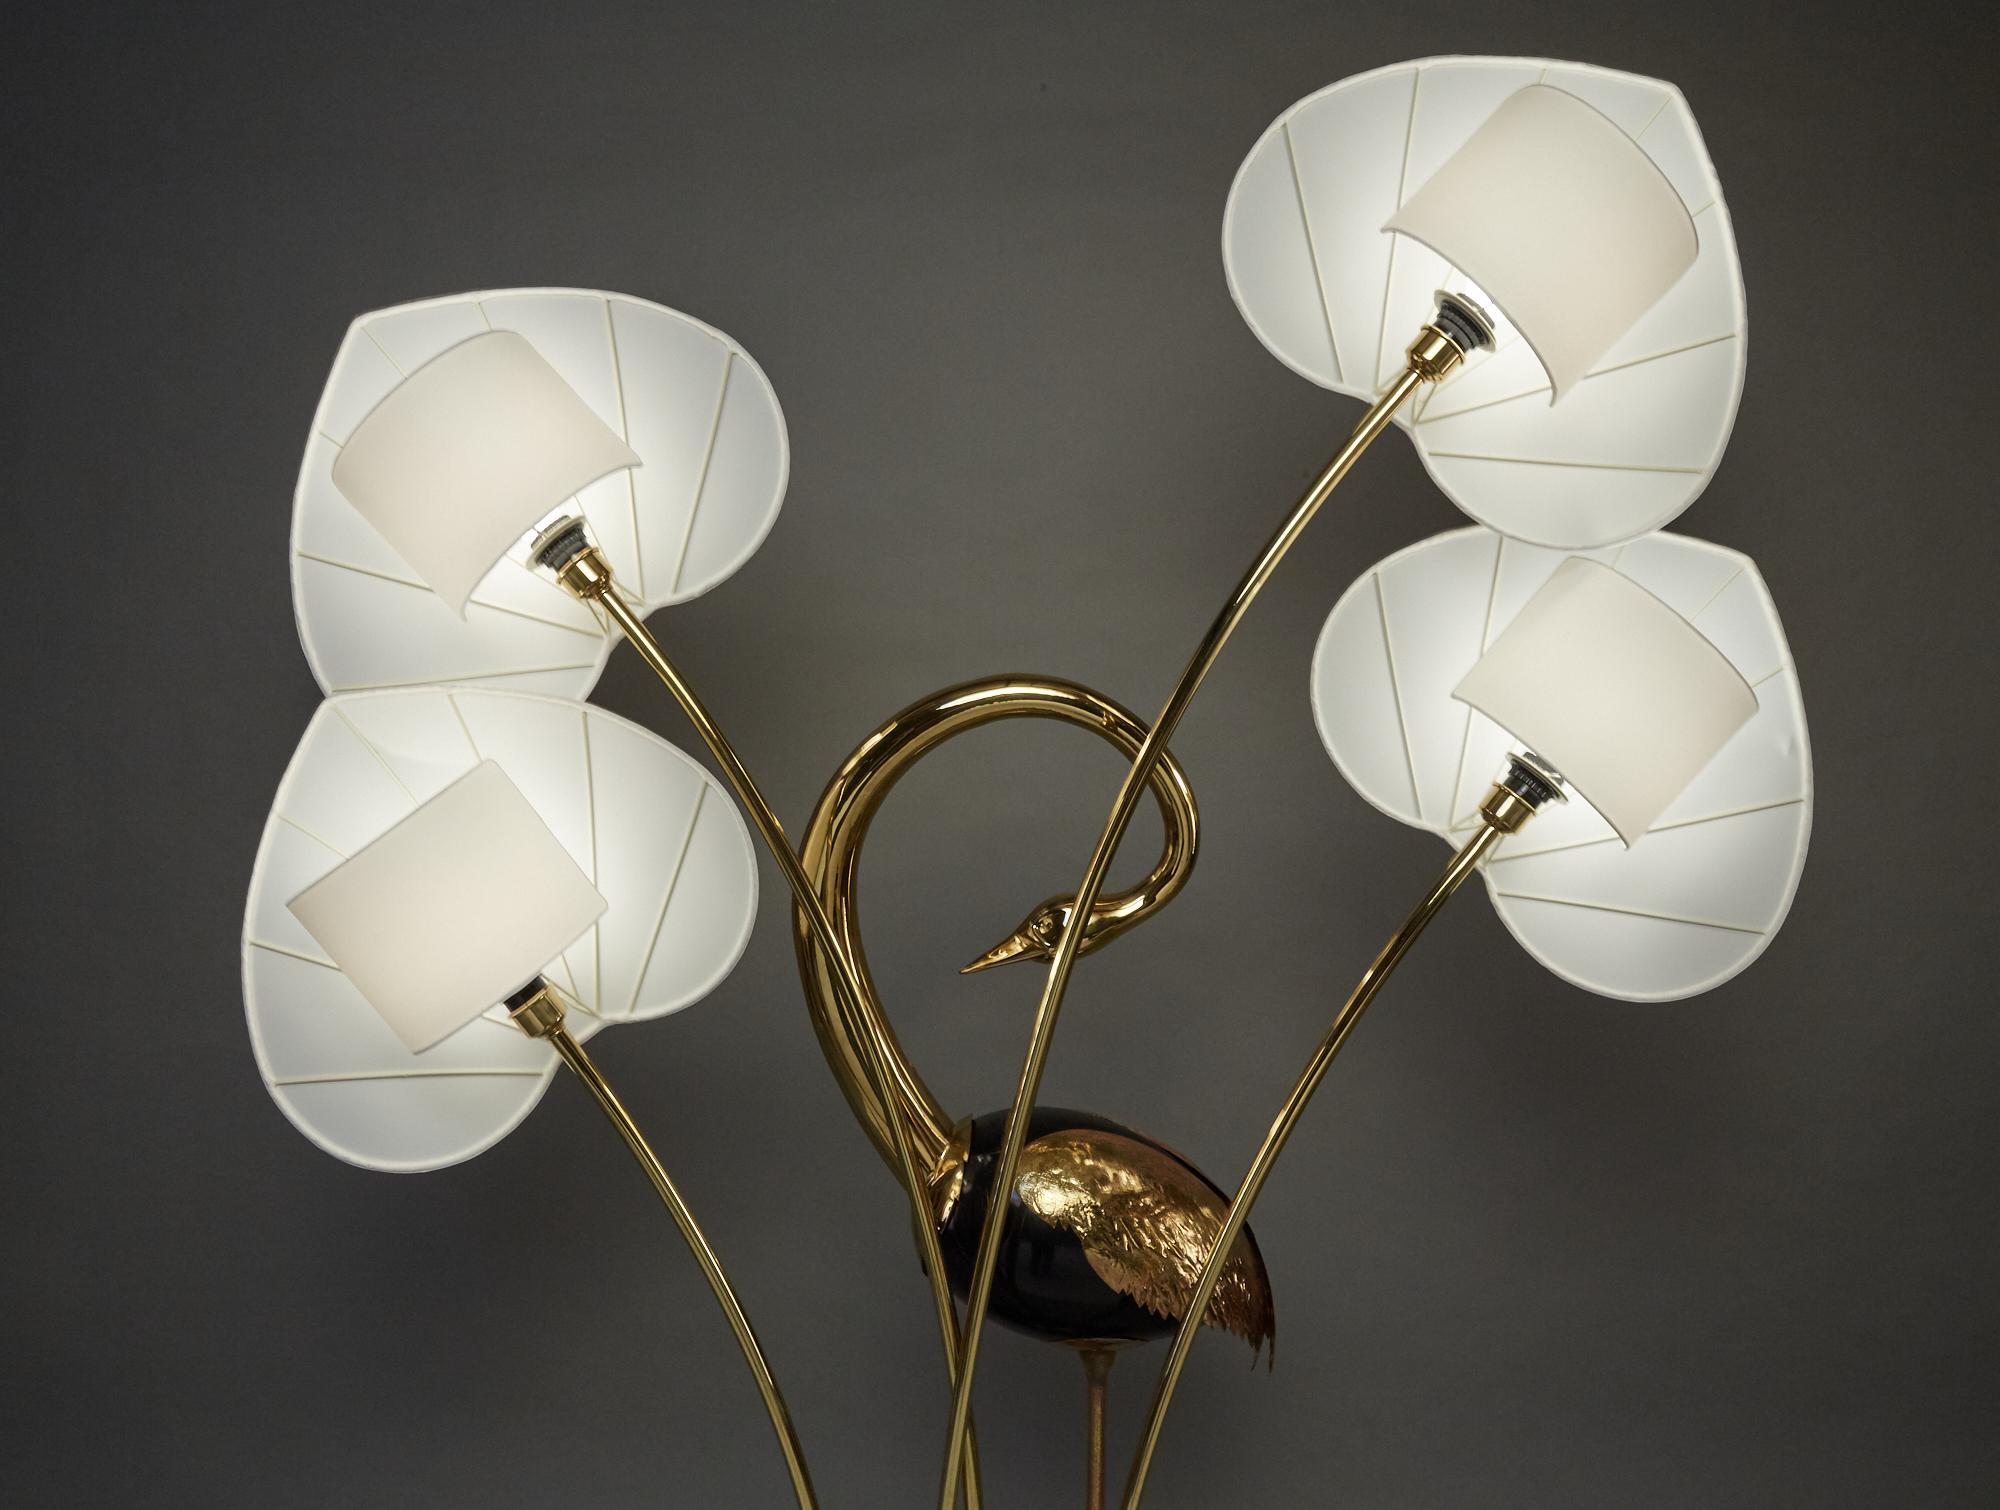 Monumental Pair of Brass Standing Egret Floor Lamps by Antonio Pavia In Good Condition For Sale In North Hollywood, CA